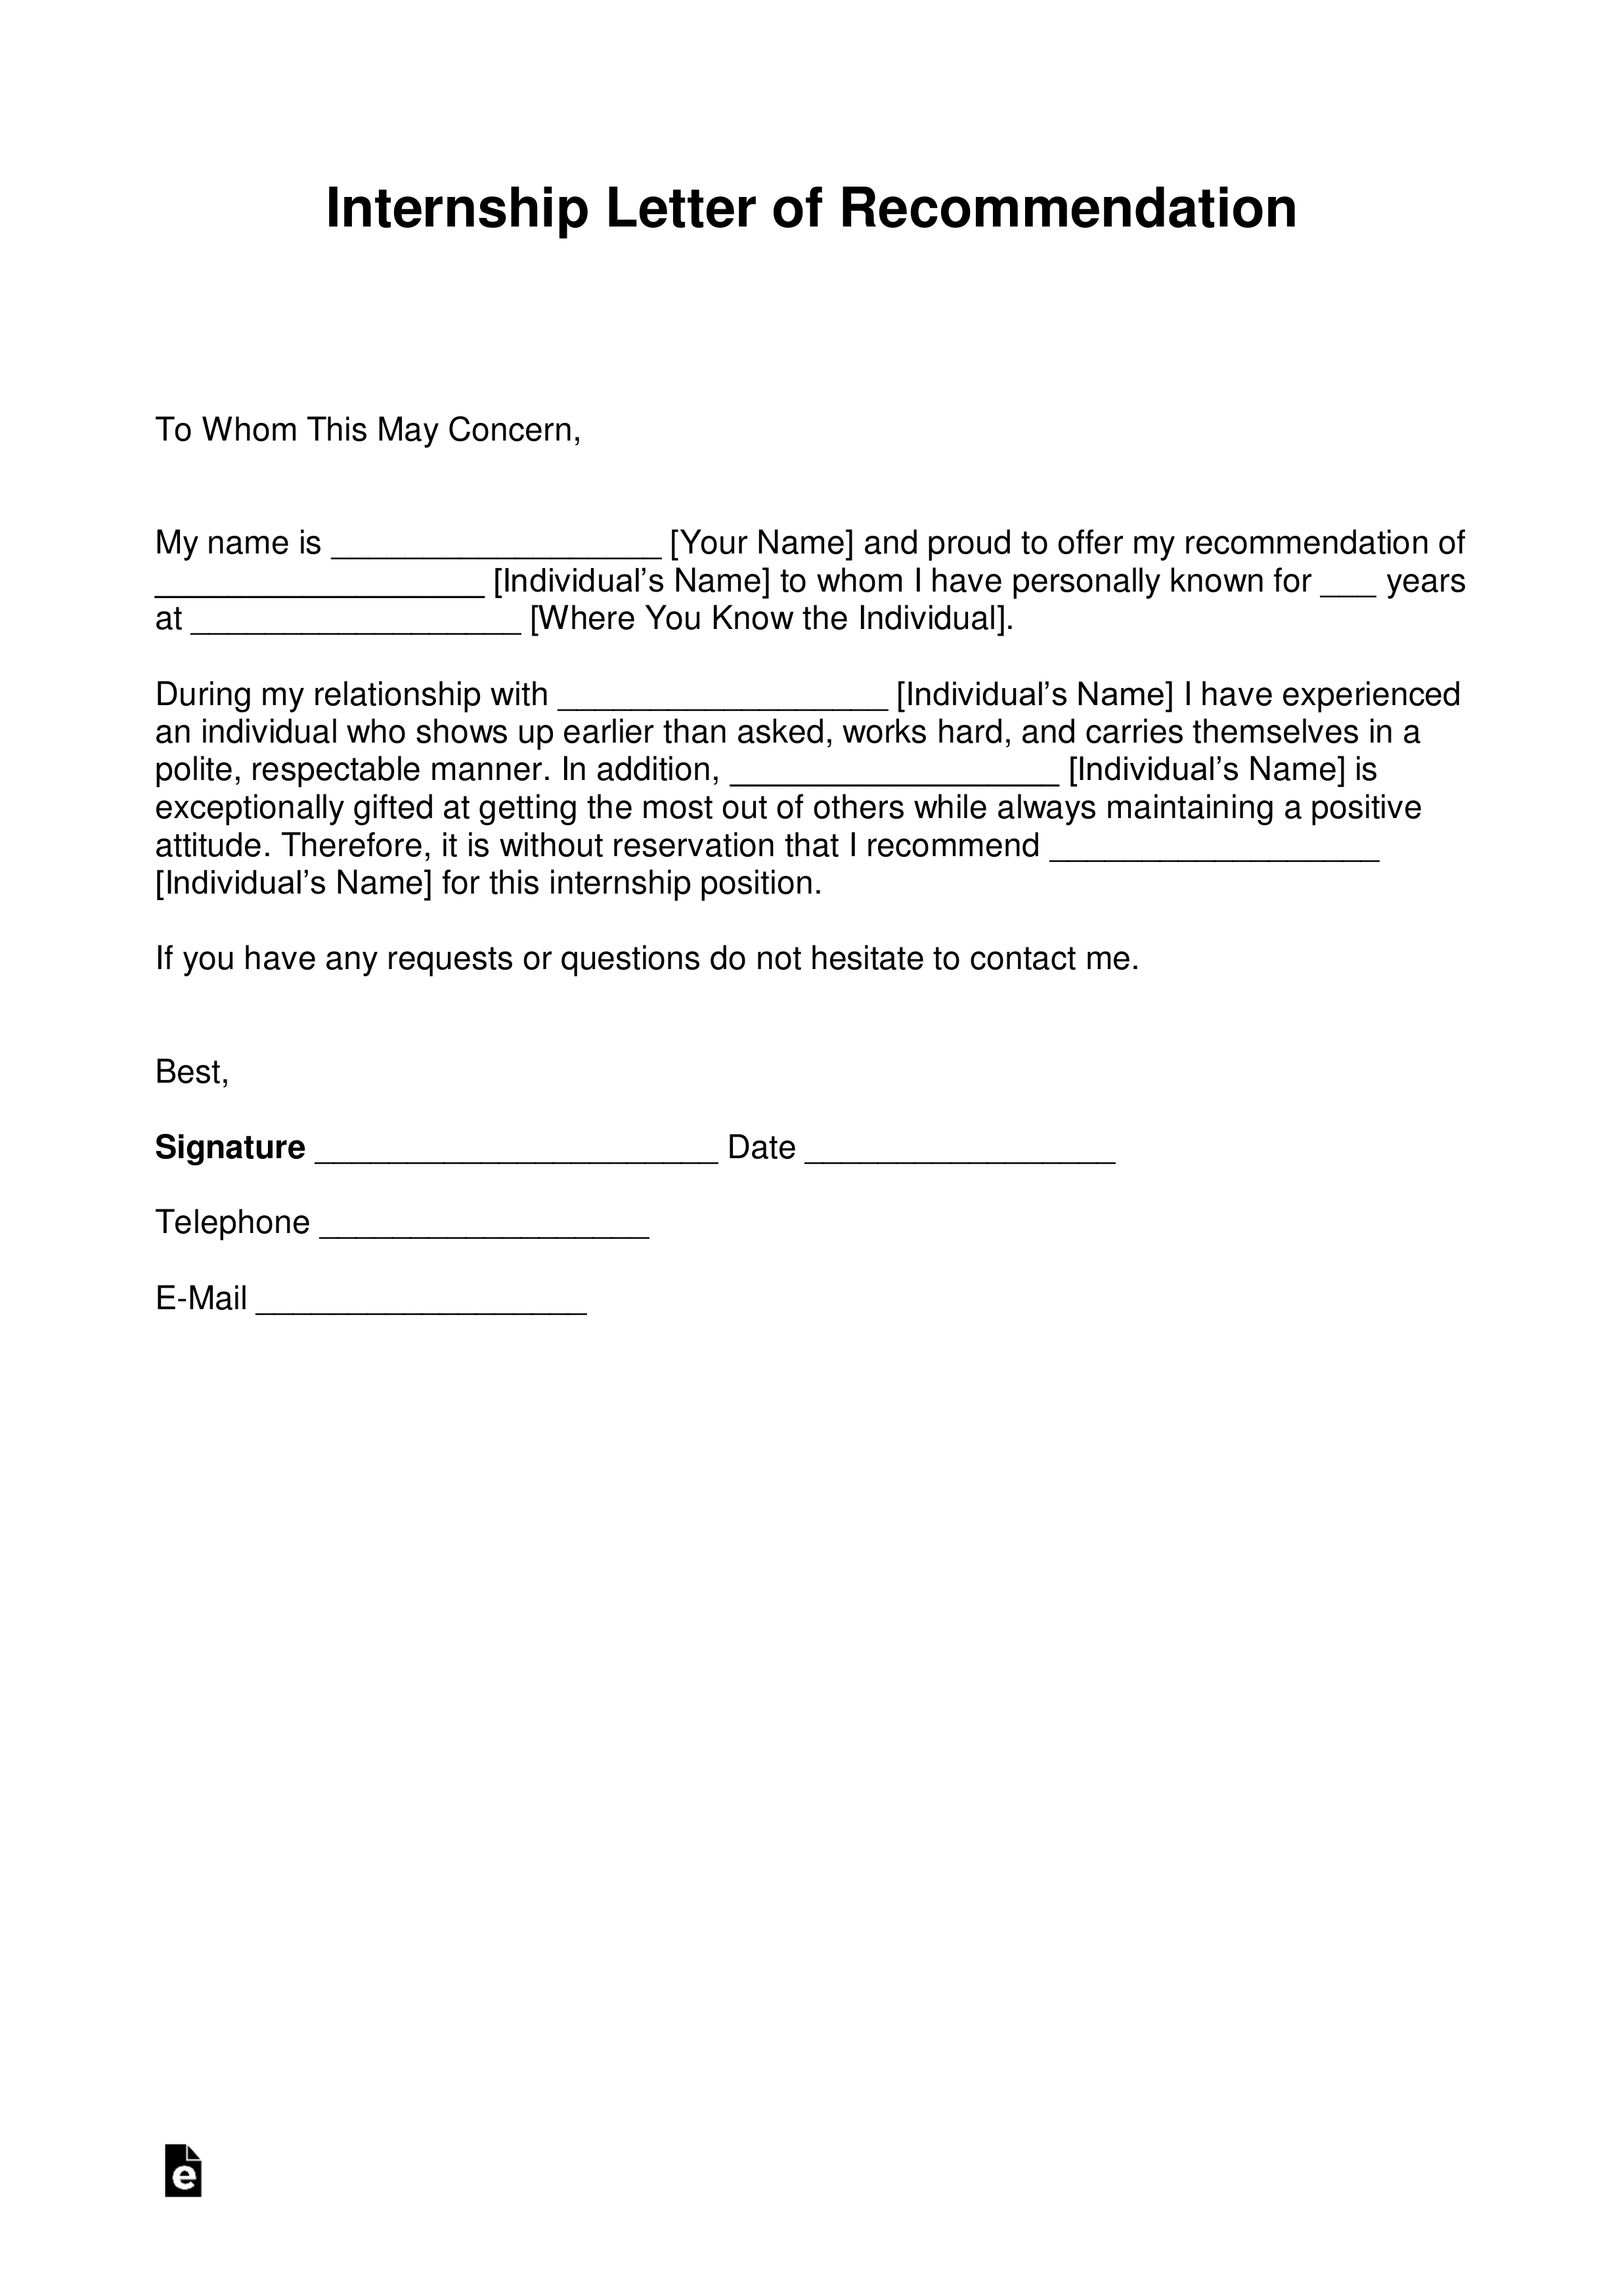 Internship Letter Of Recommendation from eforms.com